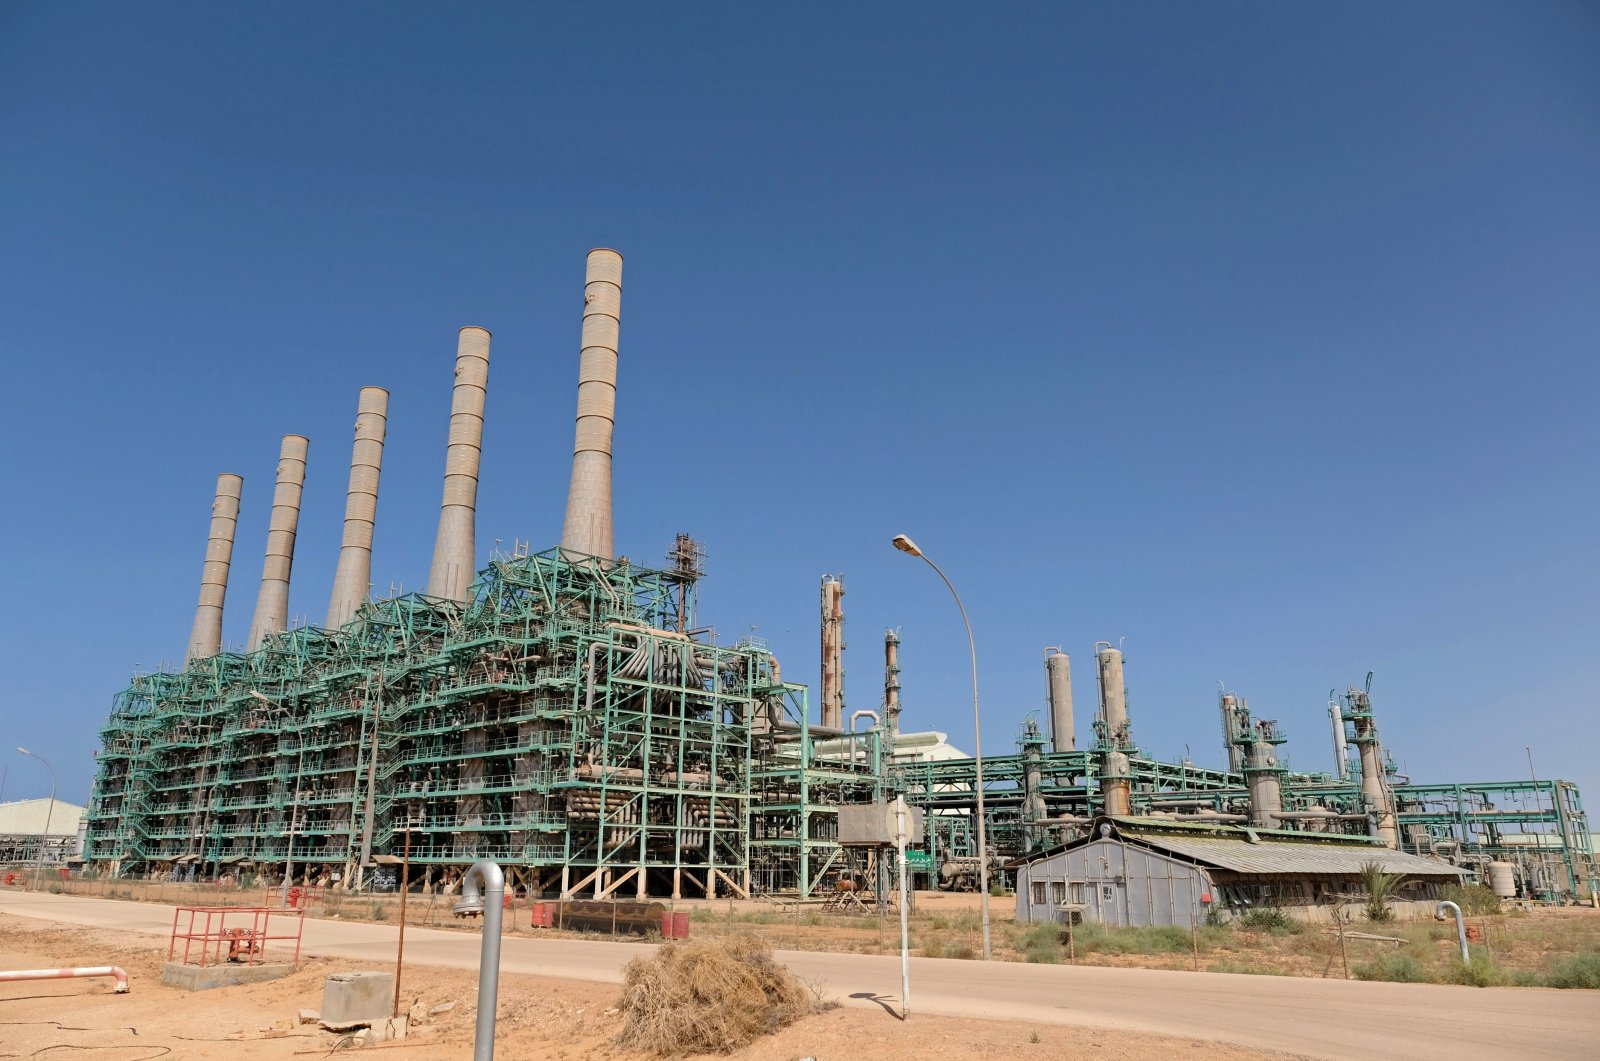 A view shows Ras Lanuf Oil and Gas Company in Ras Lanuf, Libya Aug. 18, 2020. (Reuters Photo)